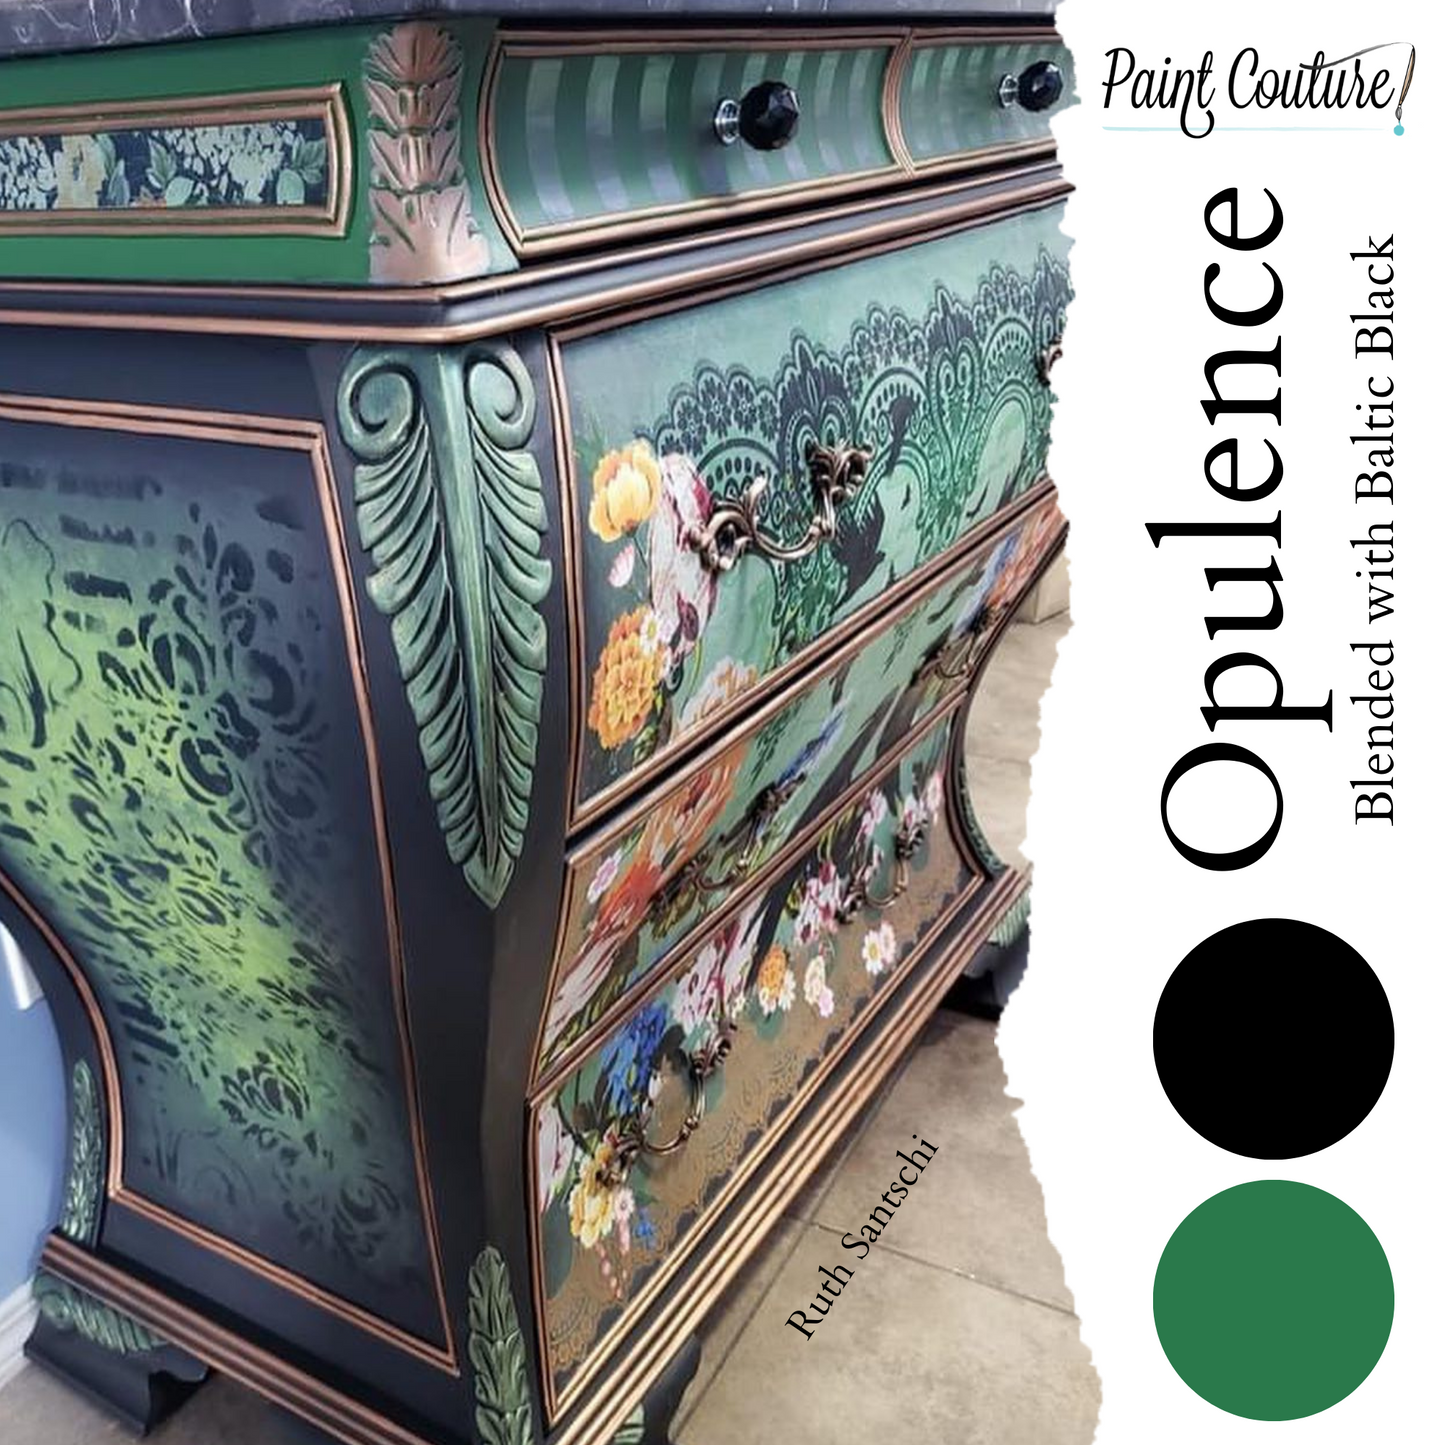 Paint Couture Opulence